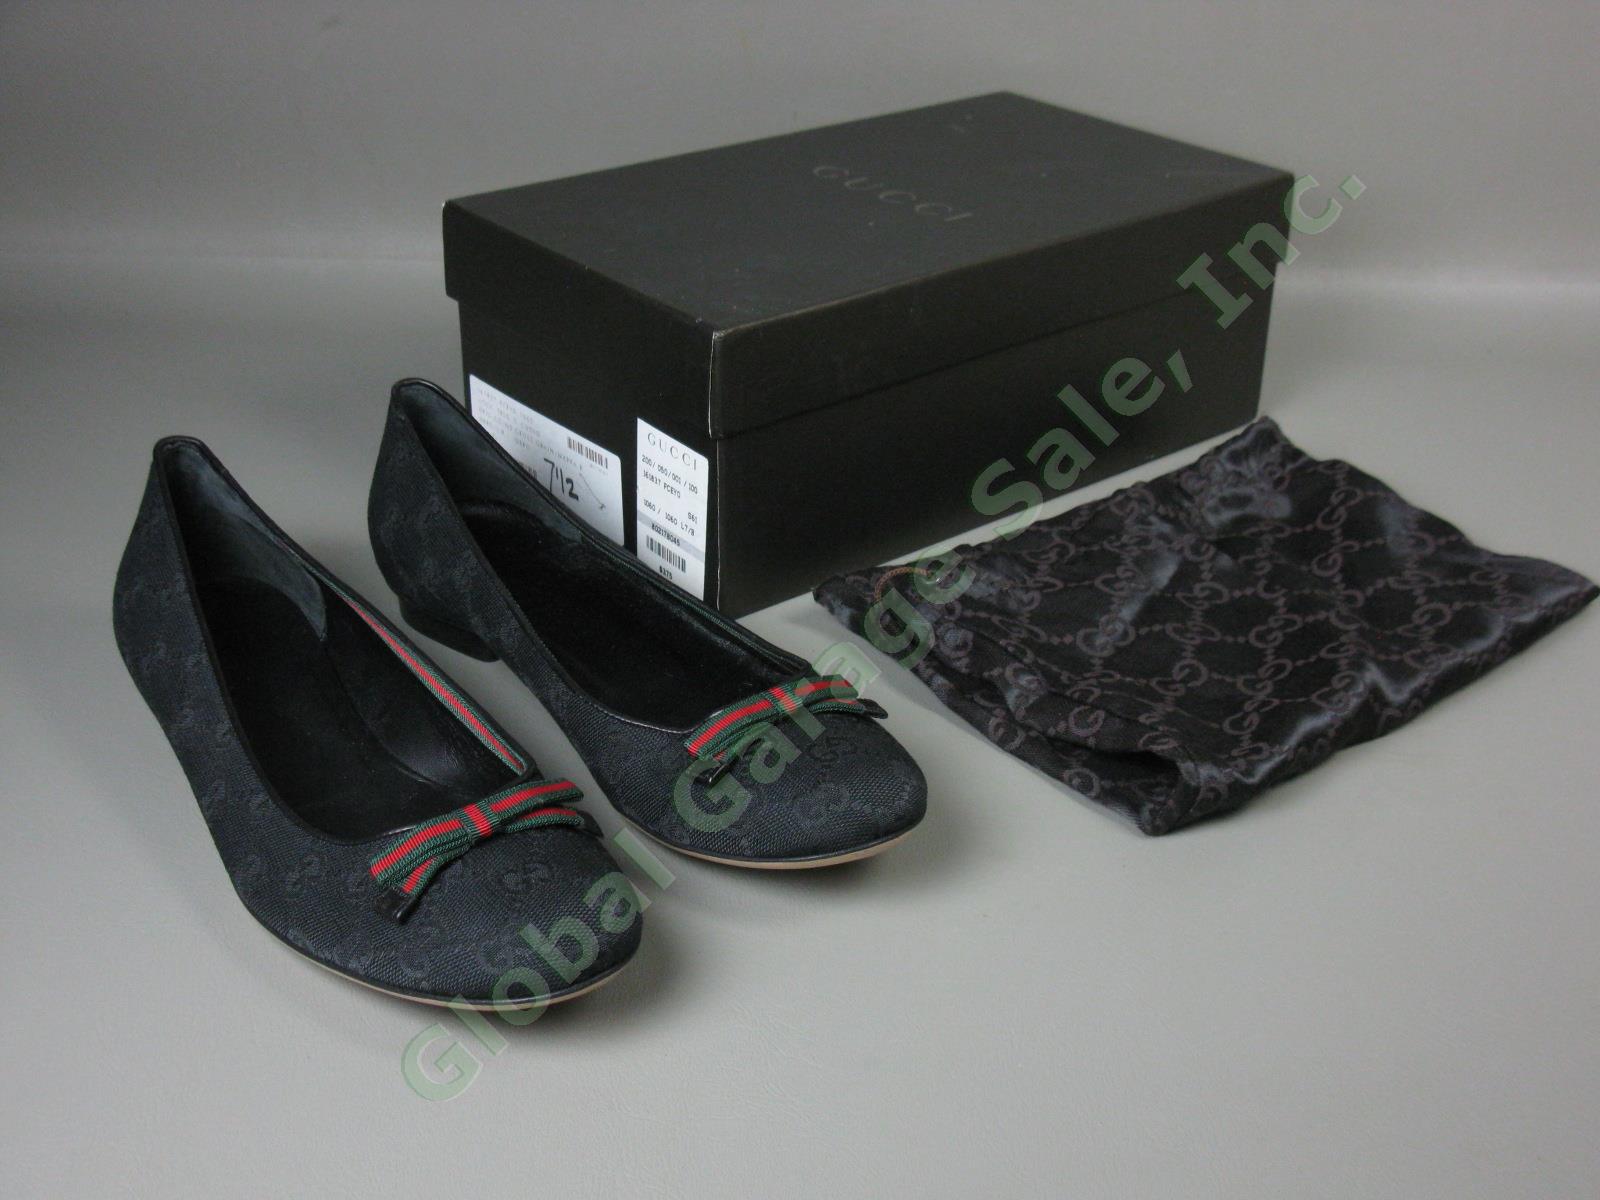 Womens Gucci Moca Tess S Cuoio Flats Size 7.5 Black One Owner With Box 161837 NR